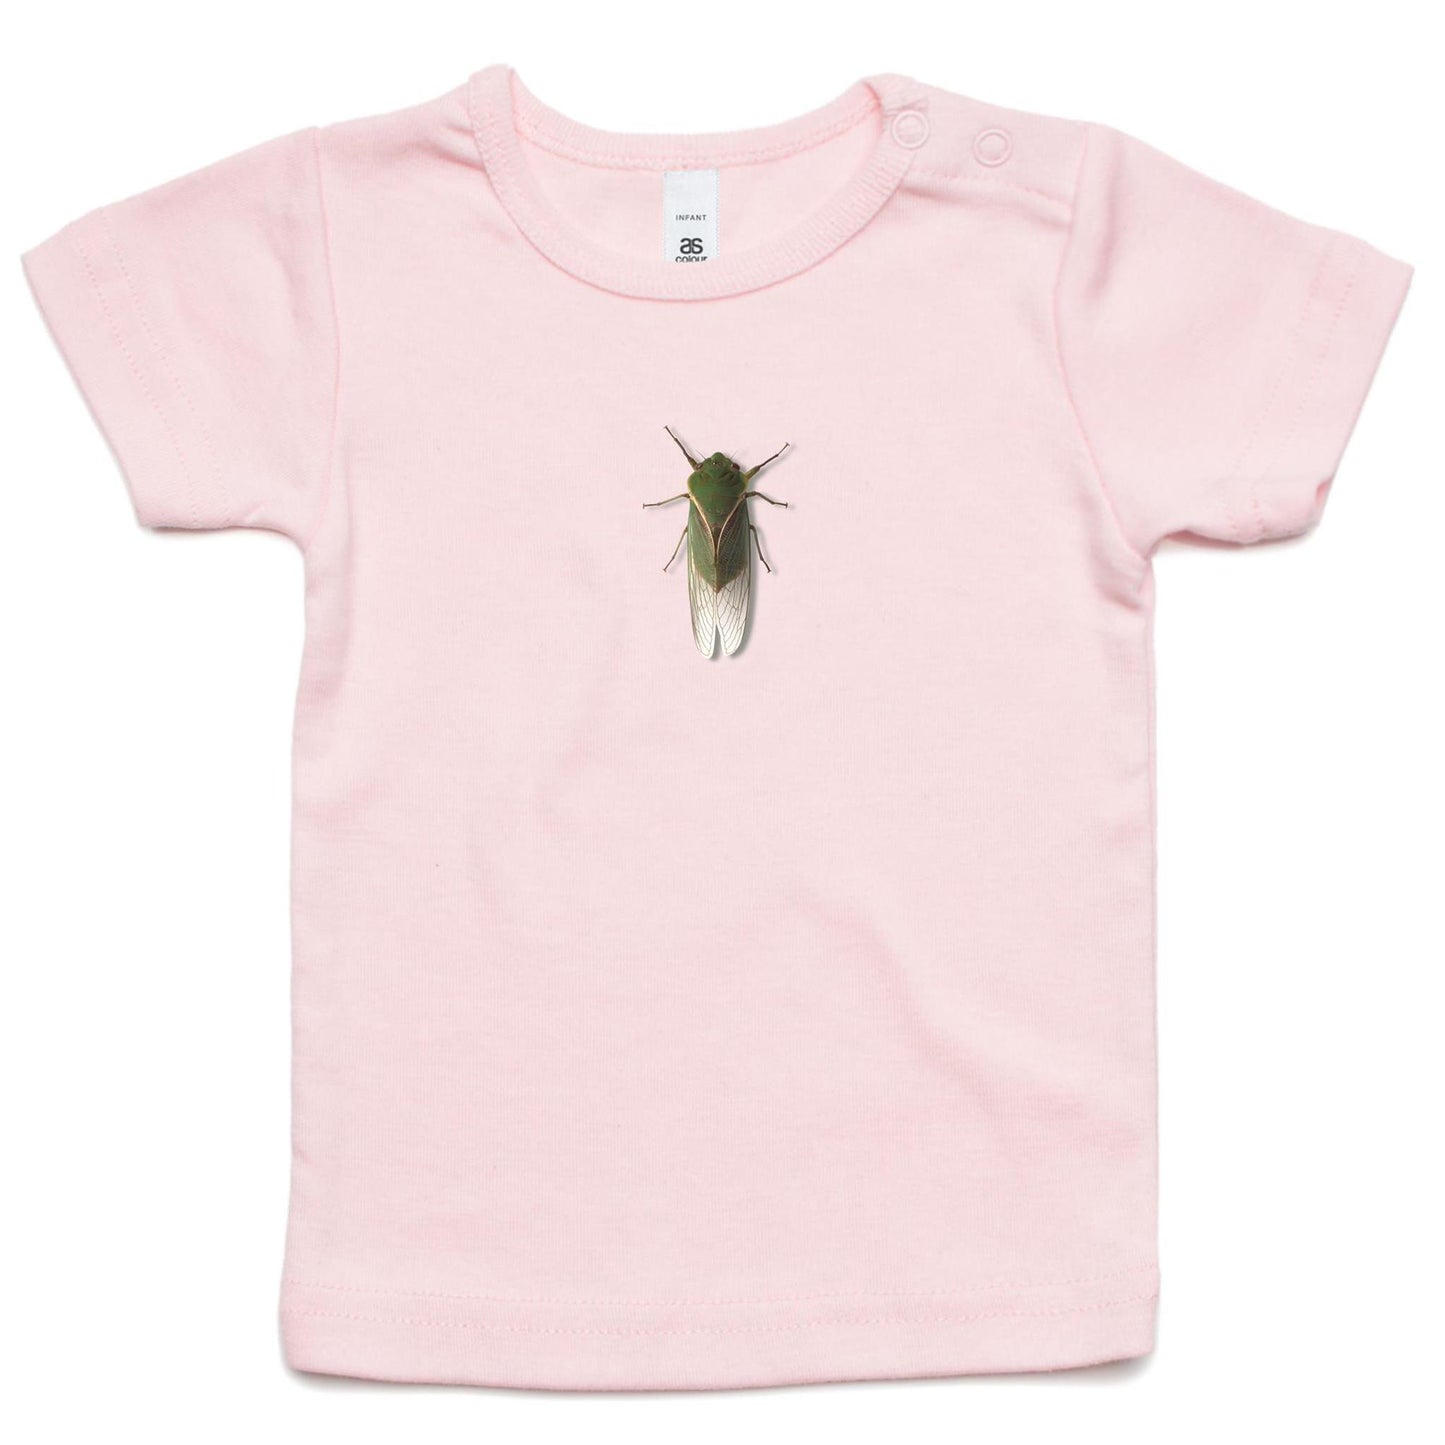 The Little Guy T Shirts for Babies